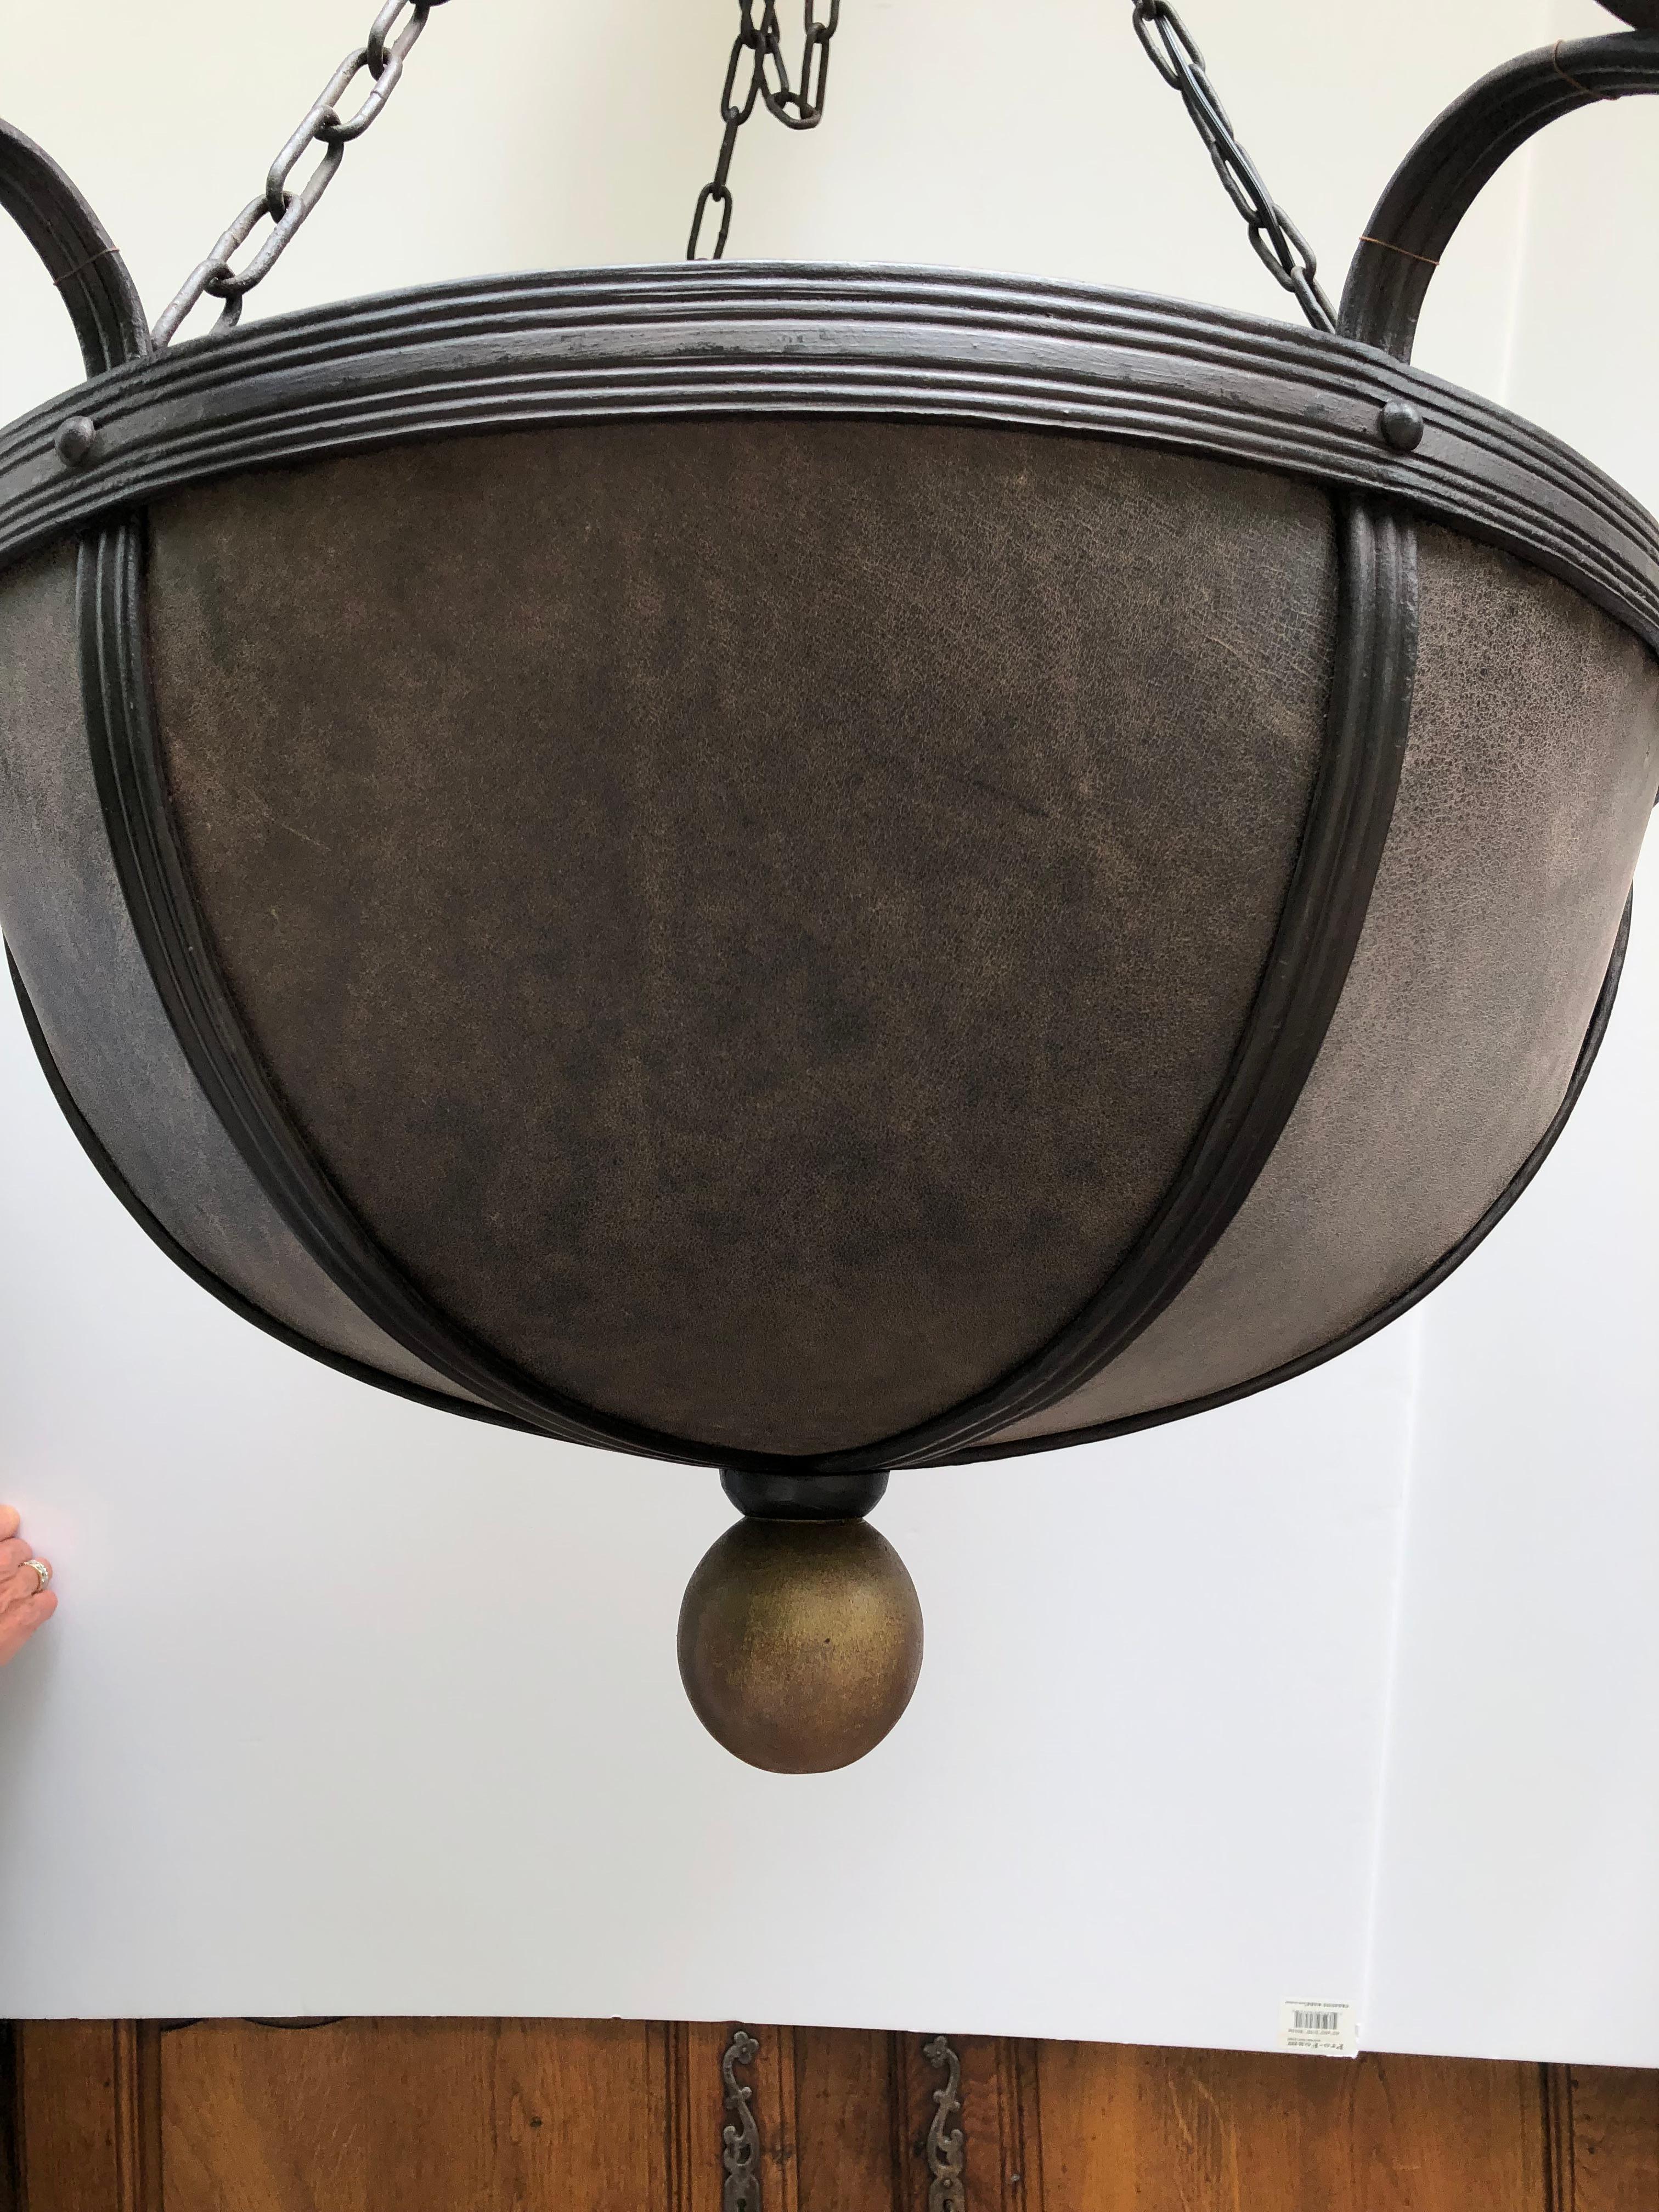 Large impressive bowl shaped chandelier made of yummy brown leather and dark brown hand forged iron. There are 6 lights around the periphery and a matte gold finial ball at the bottom.